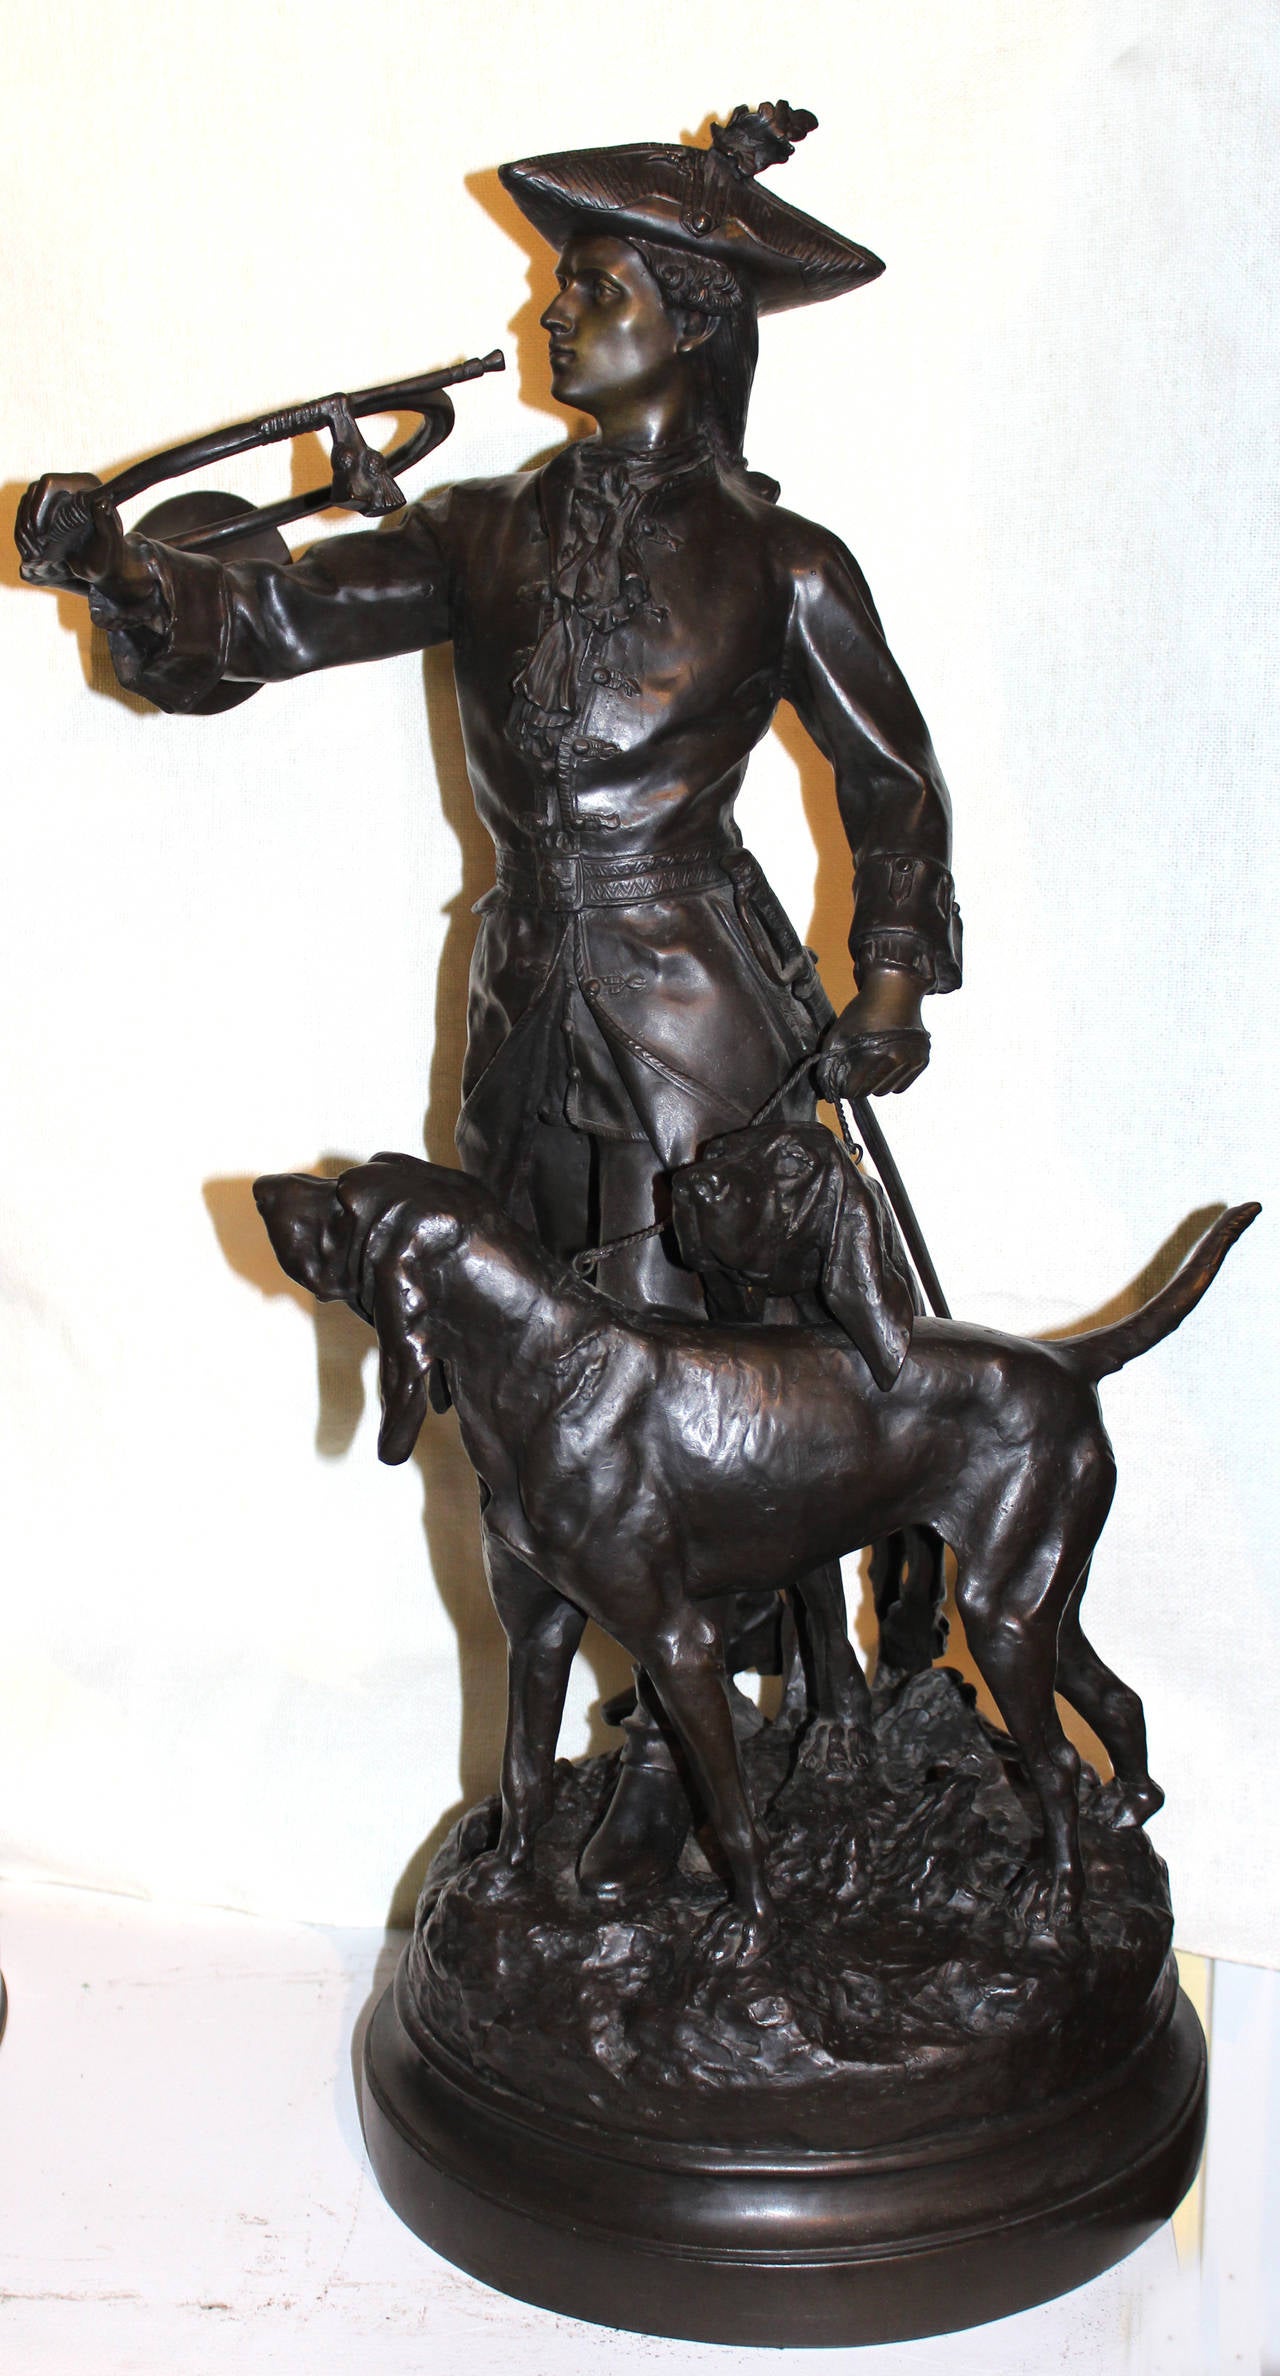 This beautifully detailed bronze casting was created by sculptors Hippolyte-Francois Moreau (French, 1832-1917), who sculpted the hunter and Prosper Lecourtier (French, 1851-1924), who sculpted the dogs. Its title in the original French is Piqueur